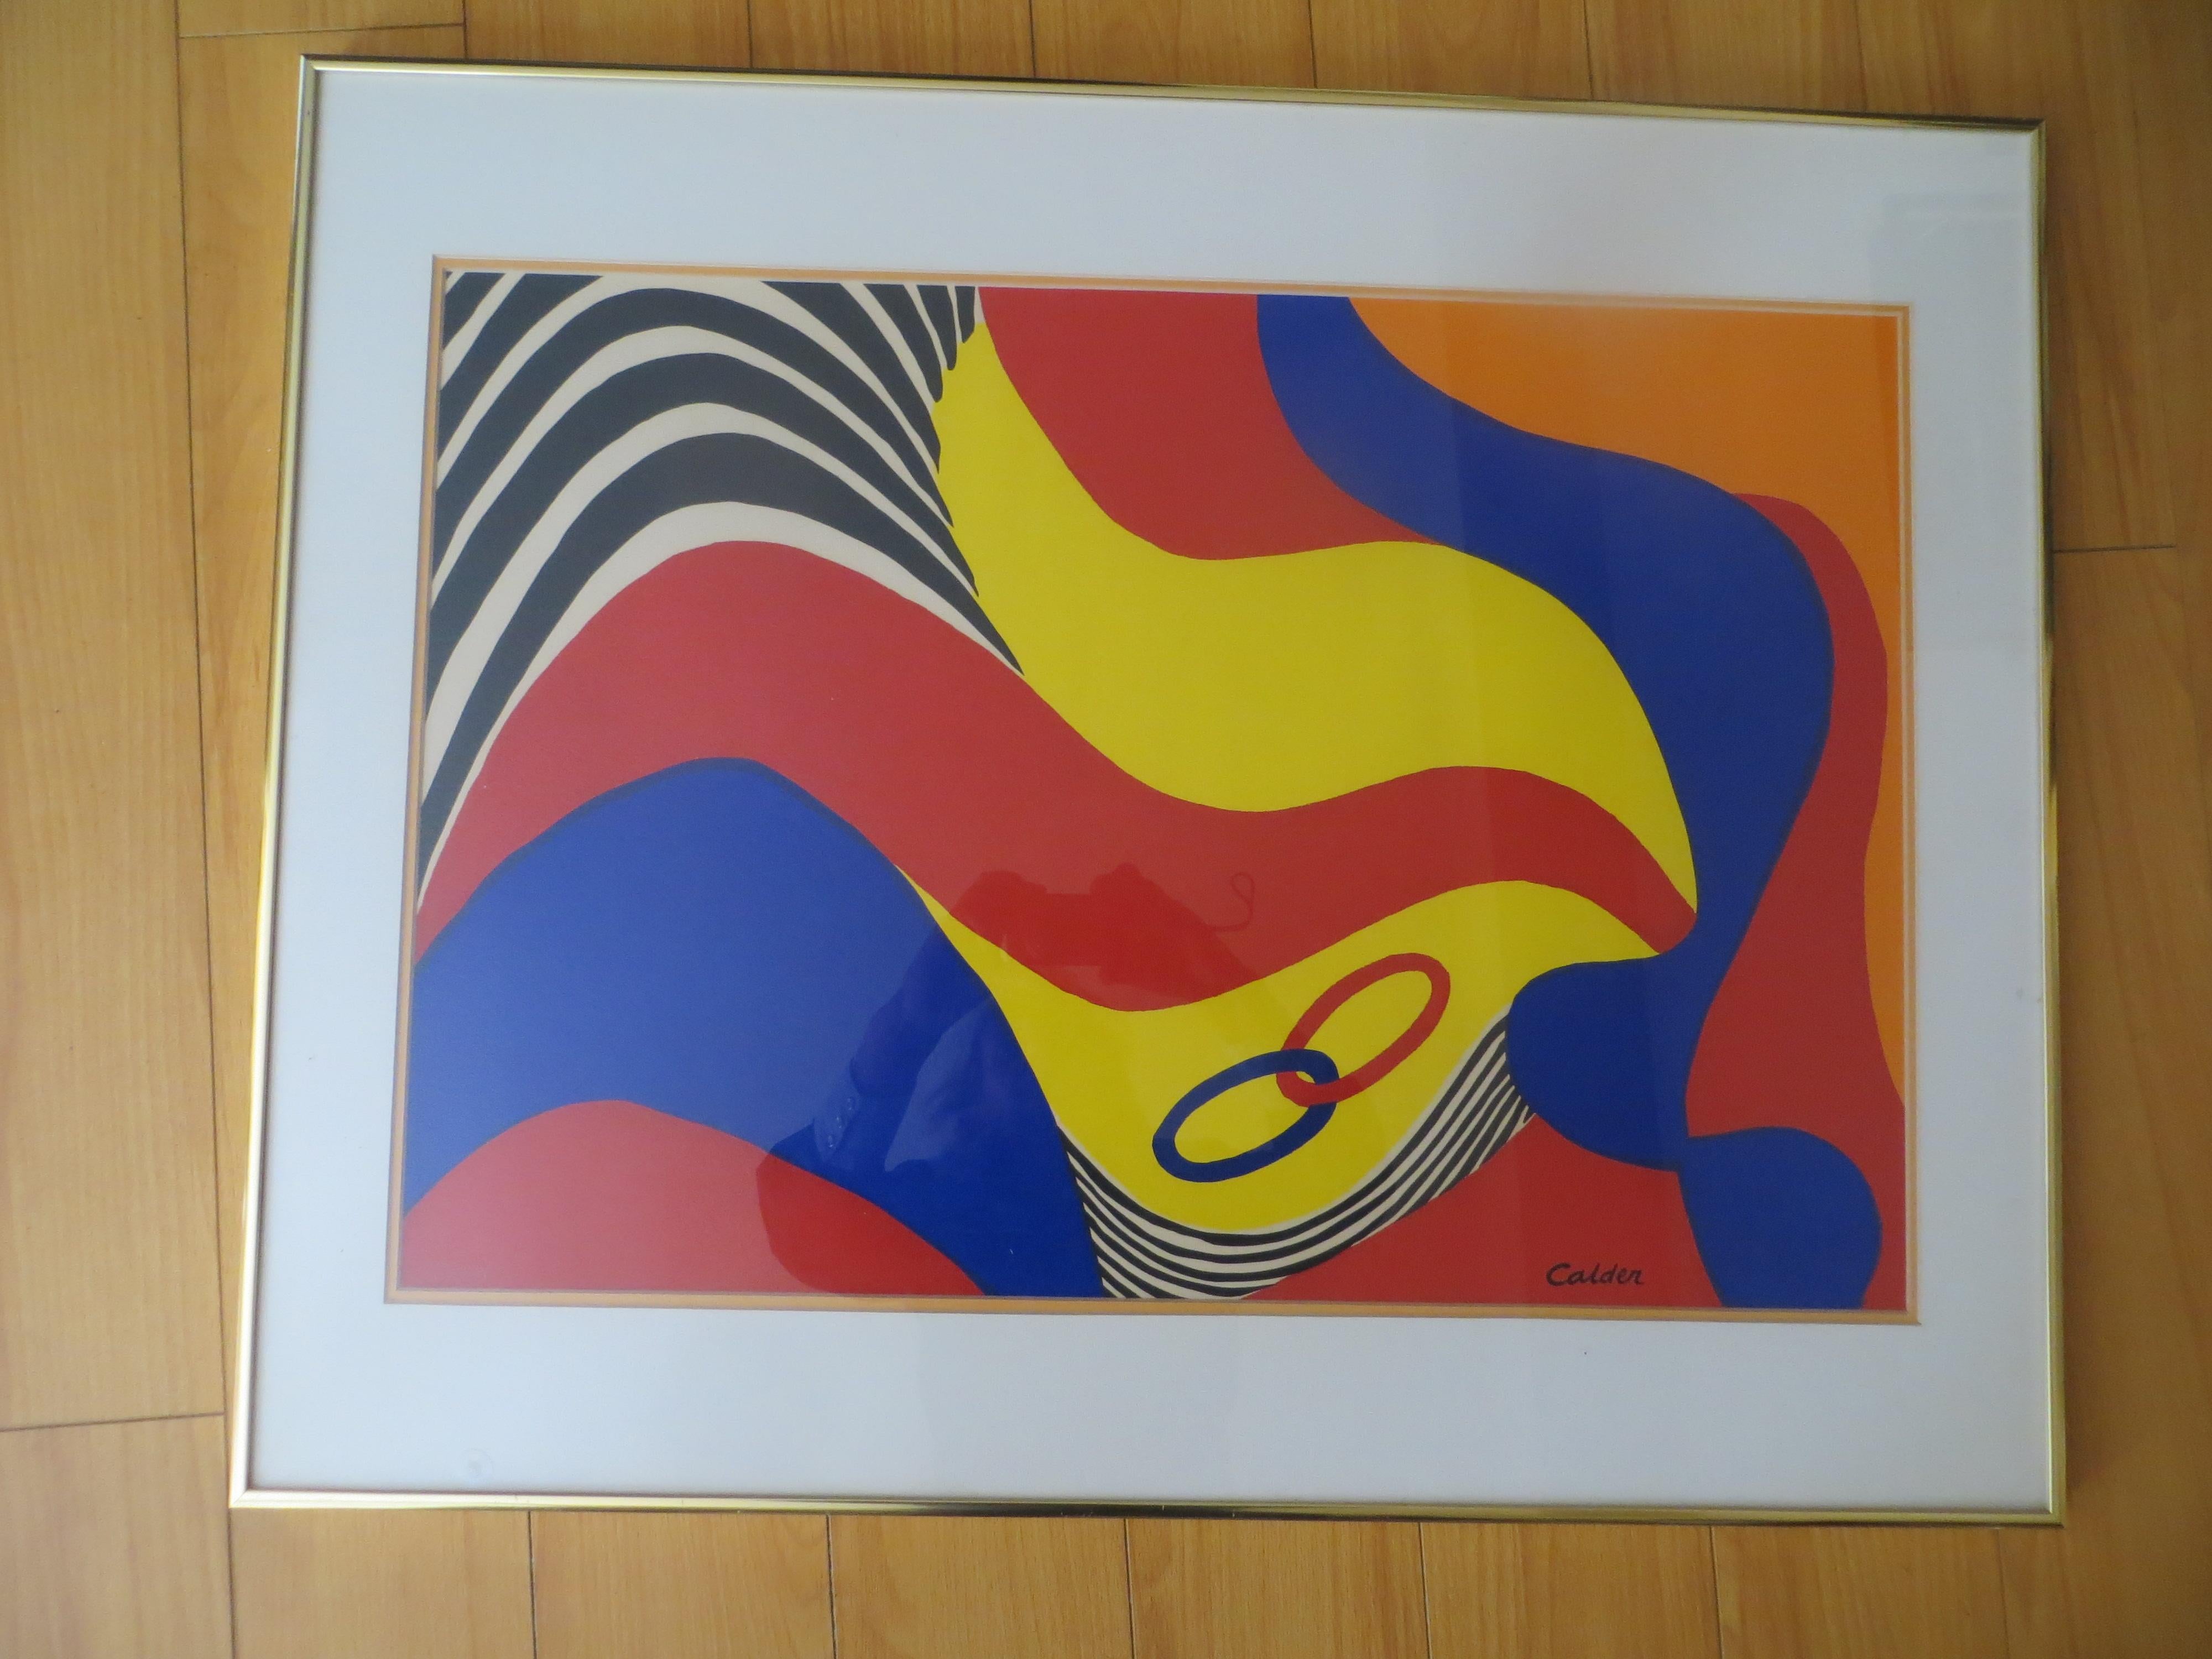  CalderAbstract lithograph Flying colors 1975 limited Edition  For Sale 3